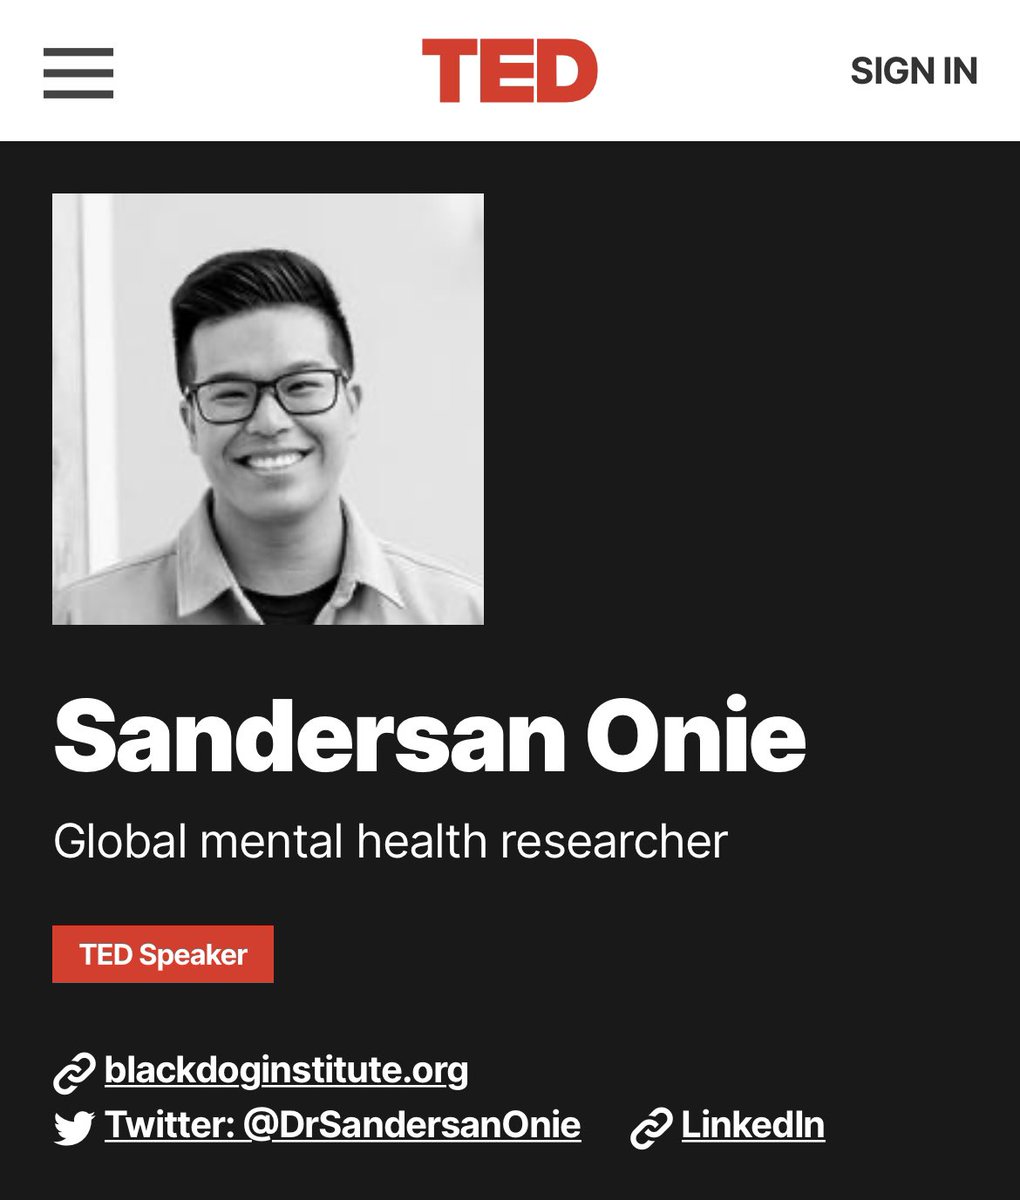 I am over the moon! @TEDTalks featured my @tedxsydney talk and profile on their official website! Glad I could share about my story and the research we do together at @blackdoginst with our many collaborators on this platform. Watch it here: shorturl.at/IL567